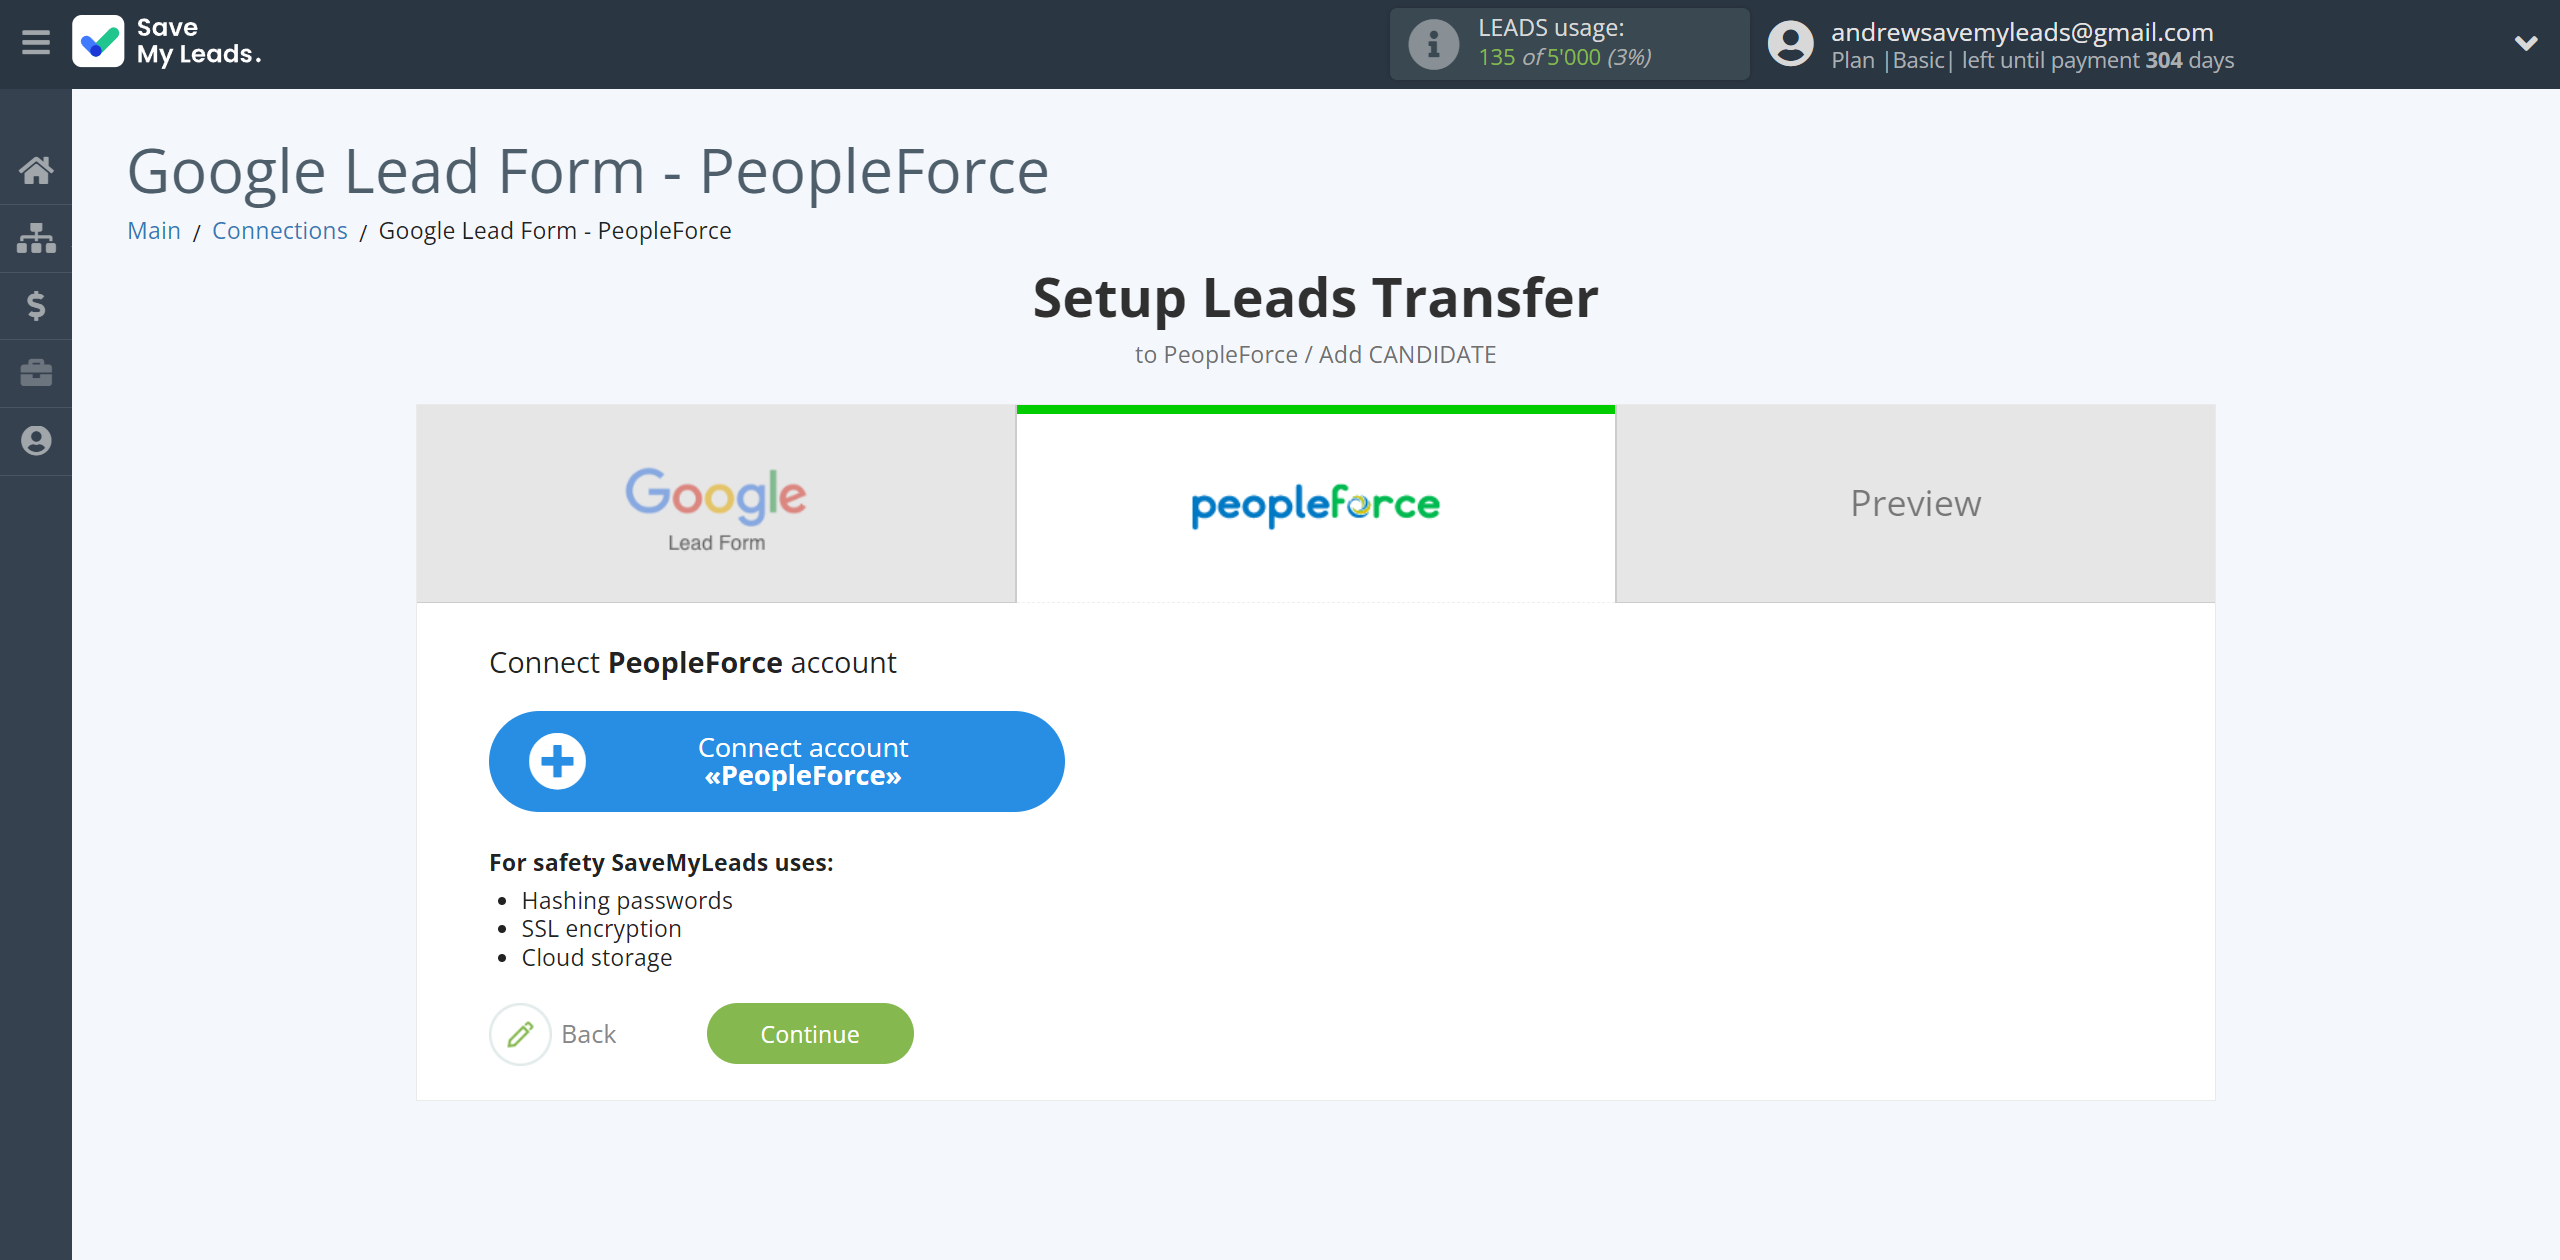 How to Connect Google Lead Form with PeopleForce Add Candidate | Data Destination account connection